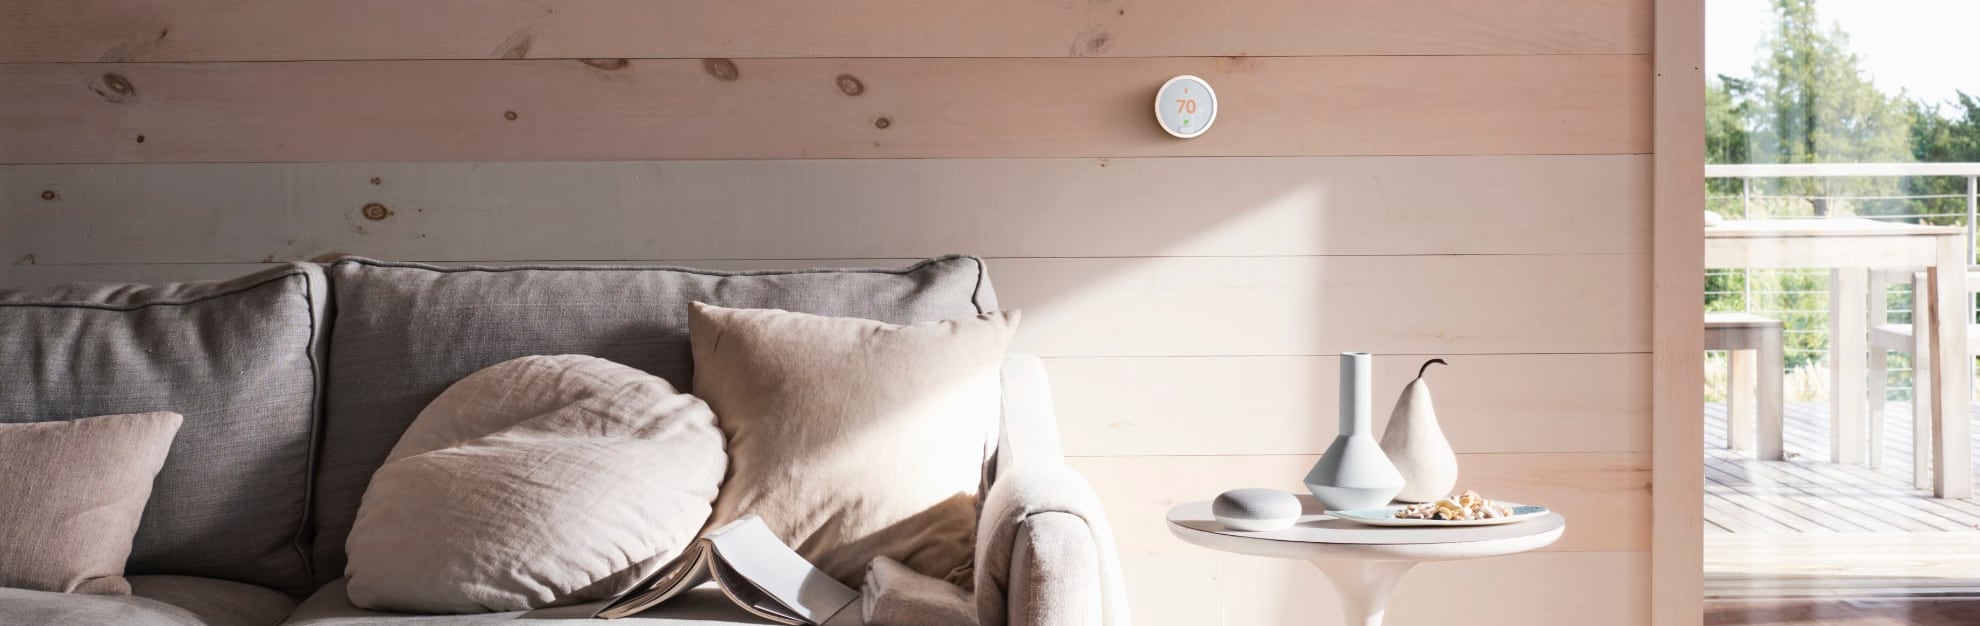 Vivint Home Automation in New Haven